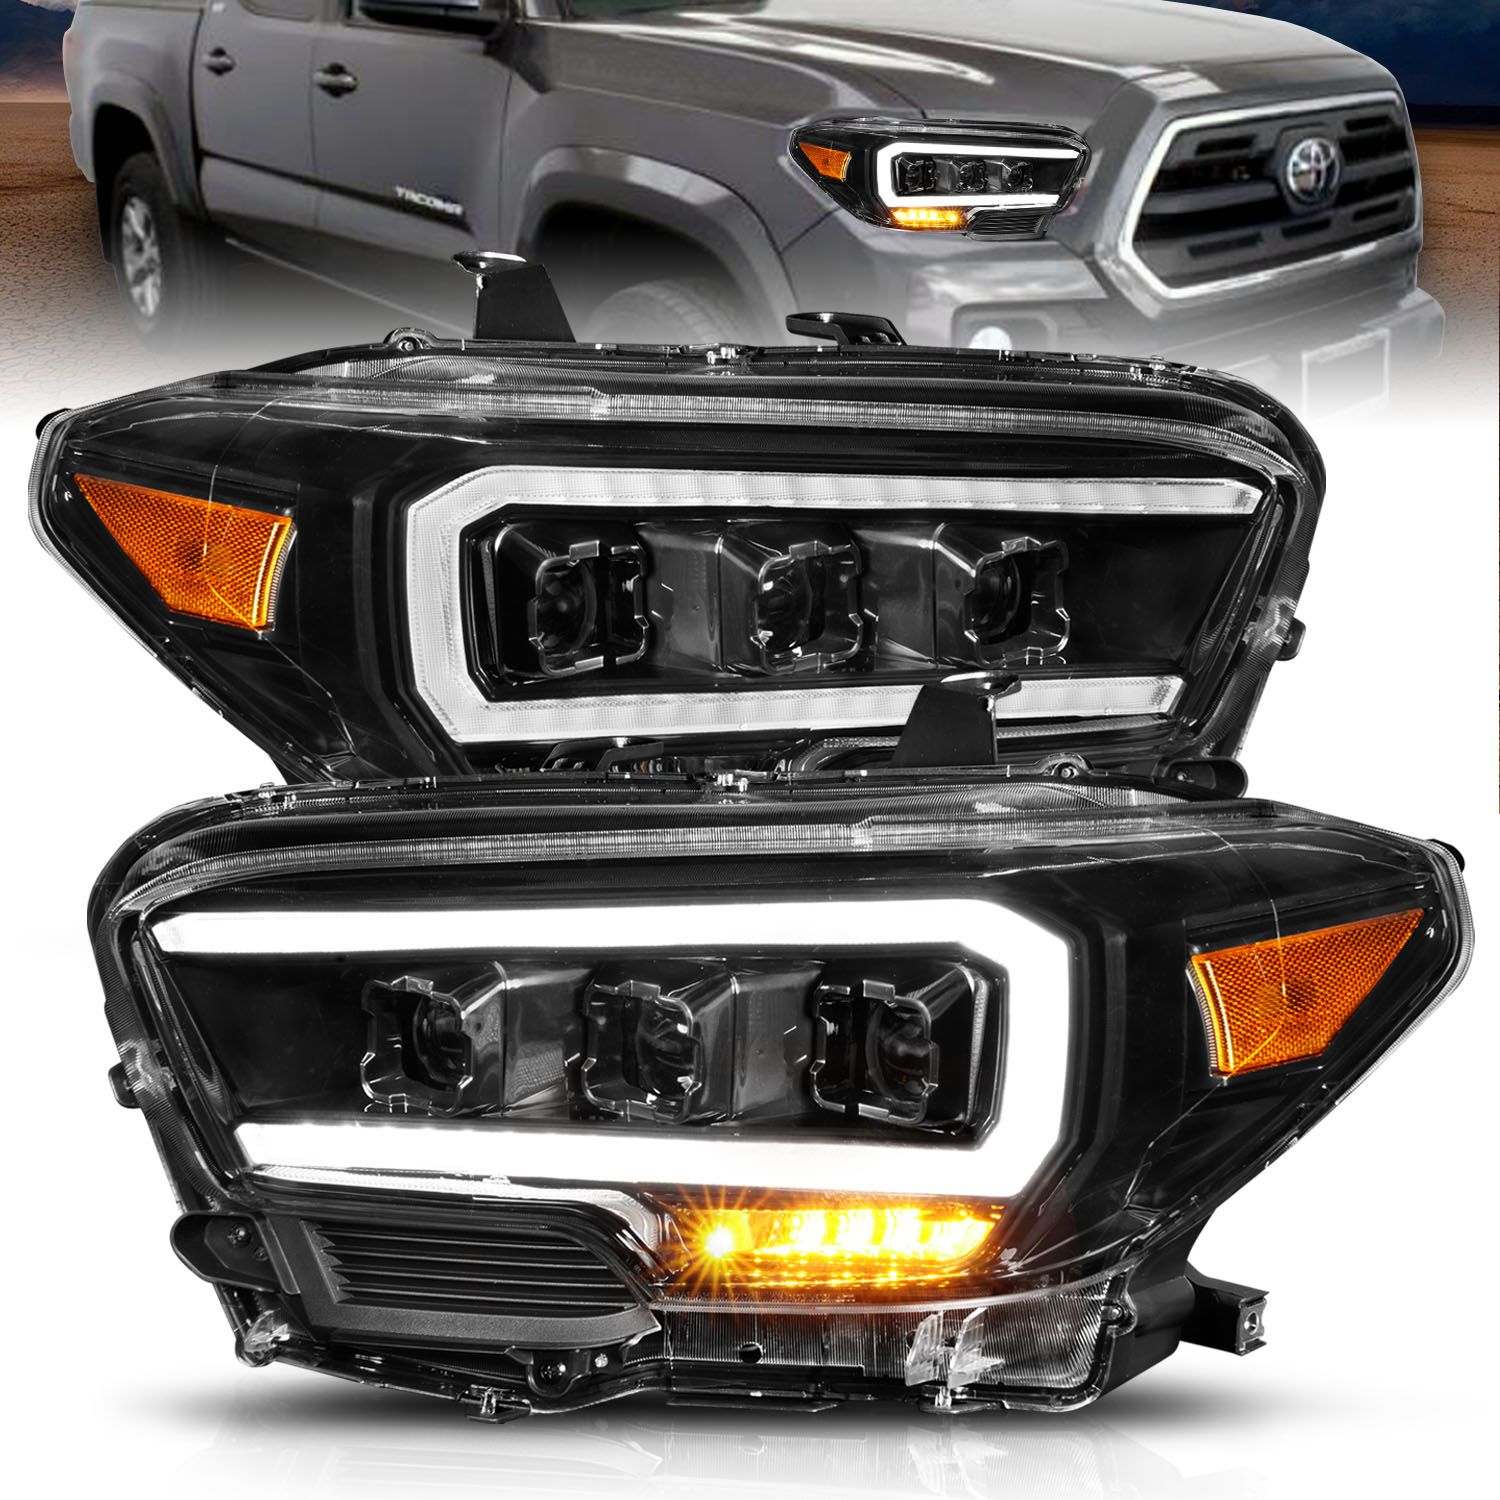 LED Projector Black Housing Headlights For 2016-2022 Toyota Tacoma TRD Trucks with Factory LED DRL [Amber Bar Turn Signal]